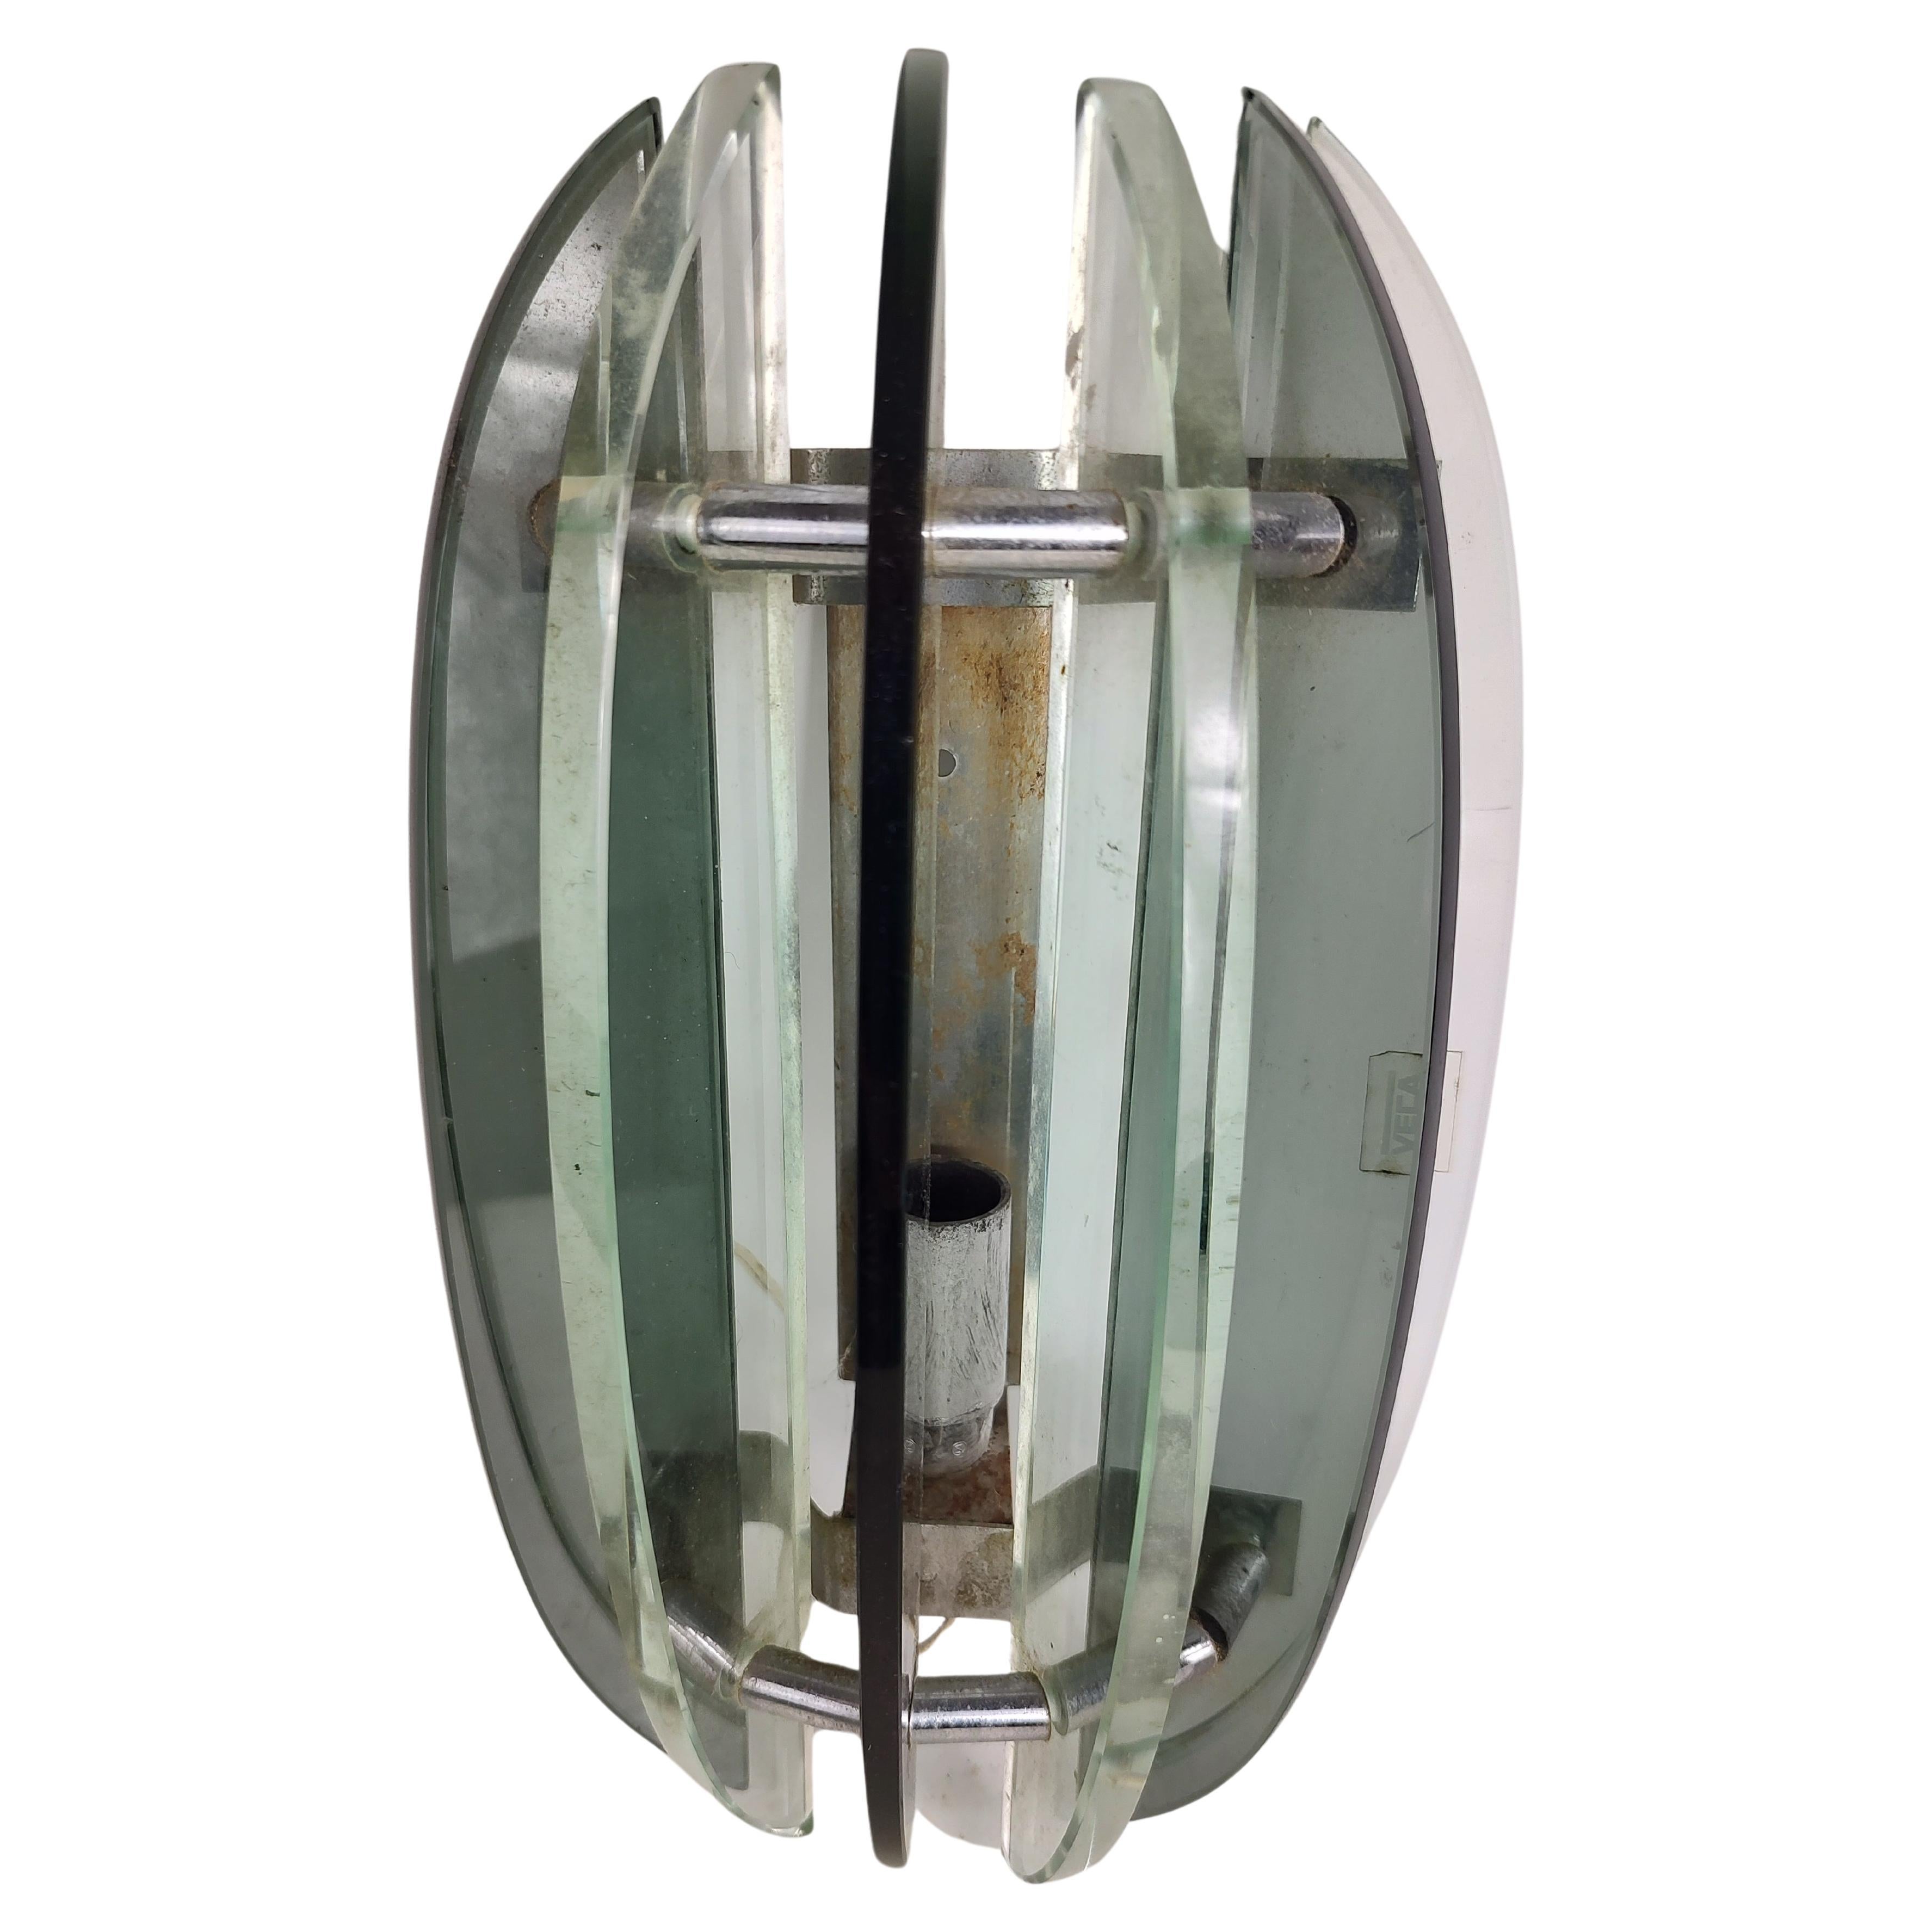 Metal Mid-Century Modern Pair of Art Glass Wall Sconces by Veca Italy c1955 For Sale